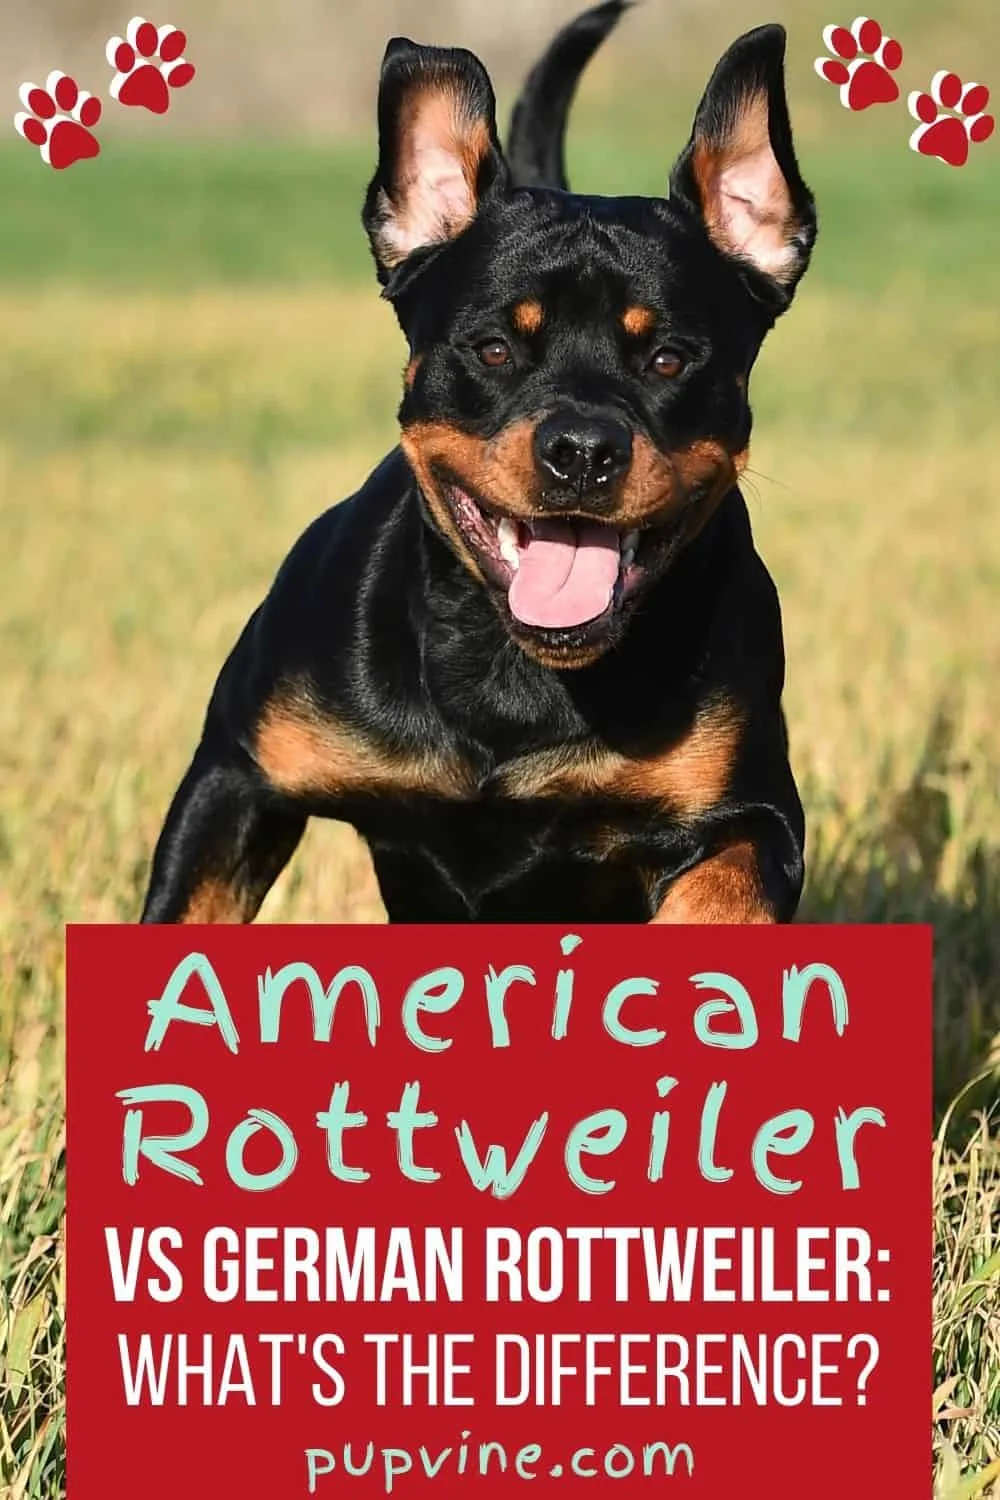 American Rottweiler vs German Rottweiler: What’s the difference?